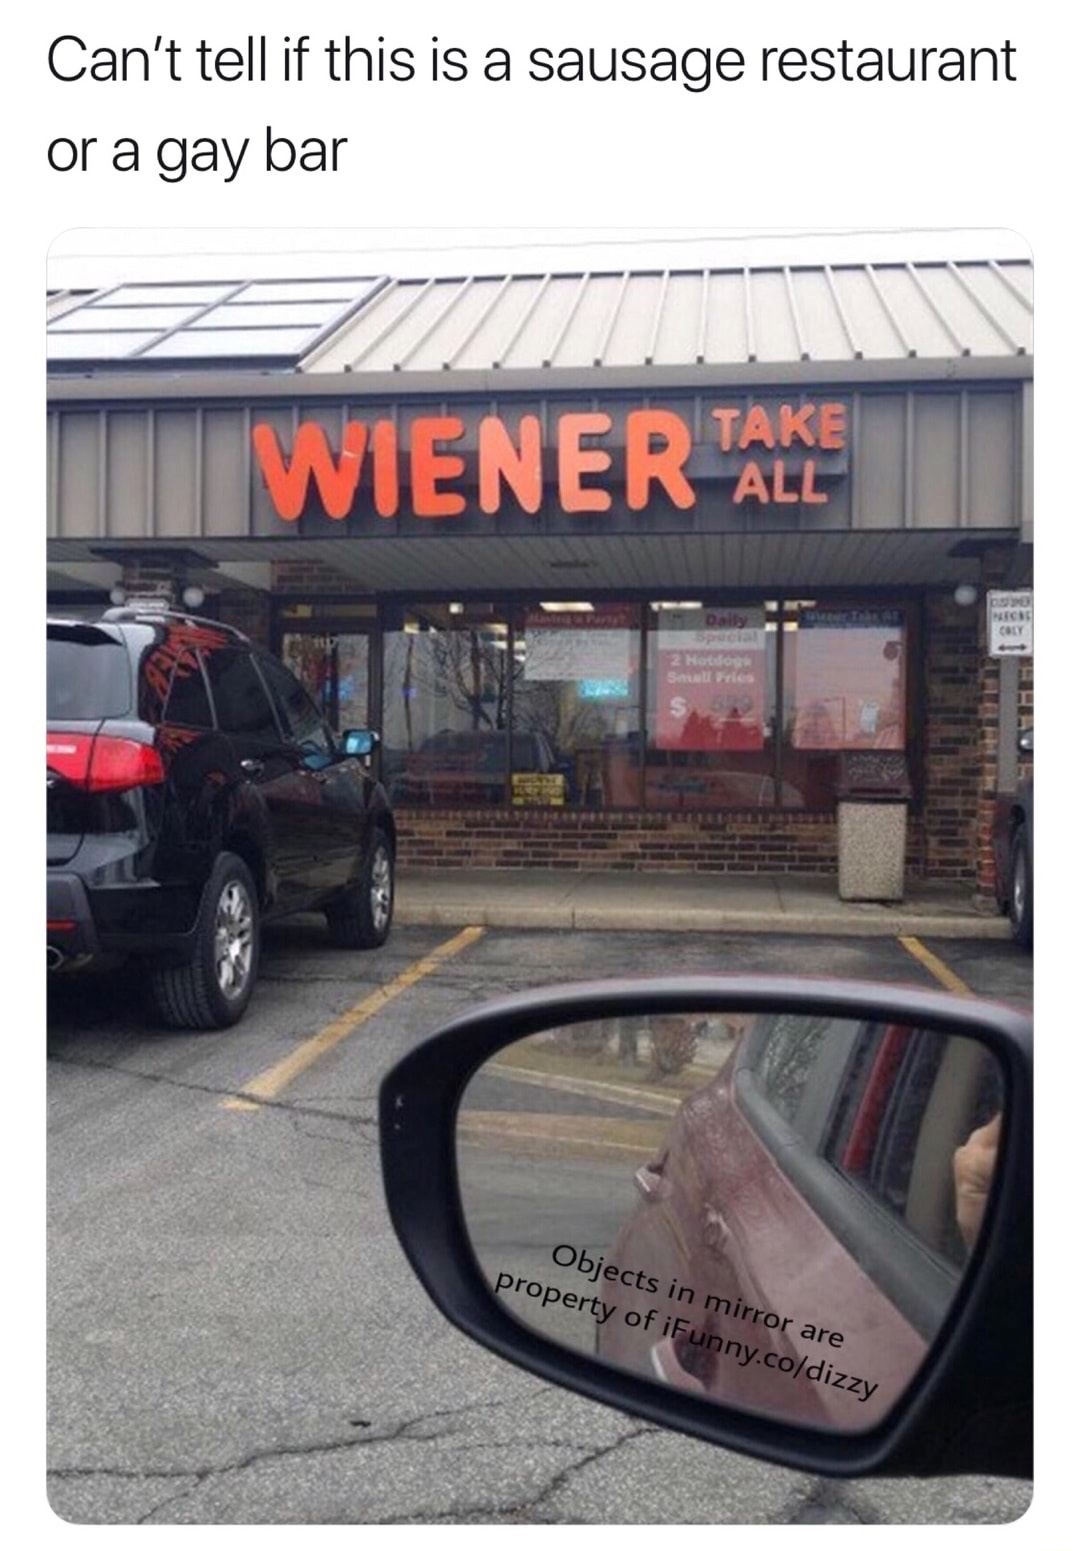 dank memes about family car - Can't tell if this is a sausage restaurant or a gay bar Wiener All All Nics Coit 2 Hotdogs Objects in mirror are property of iFunny.codizzy